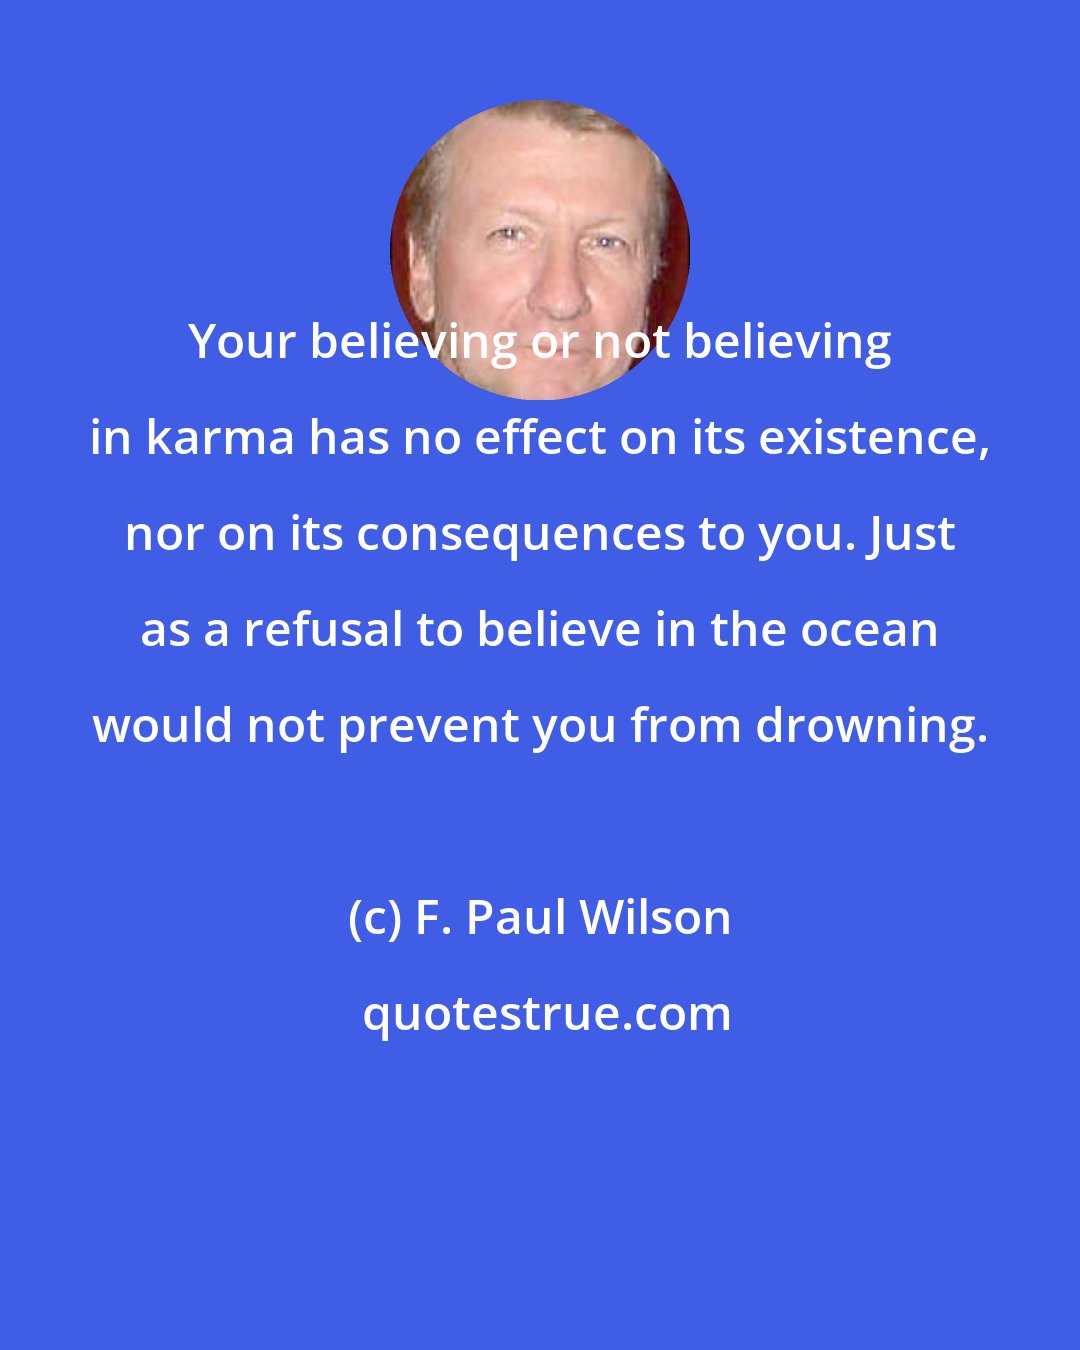 F. Paul Wilson: Your believing or not believing in karma has no effect on its existence, nor on its consequences to you. Just as a refusal to believe in the ocean would not prevent you from drowning.